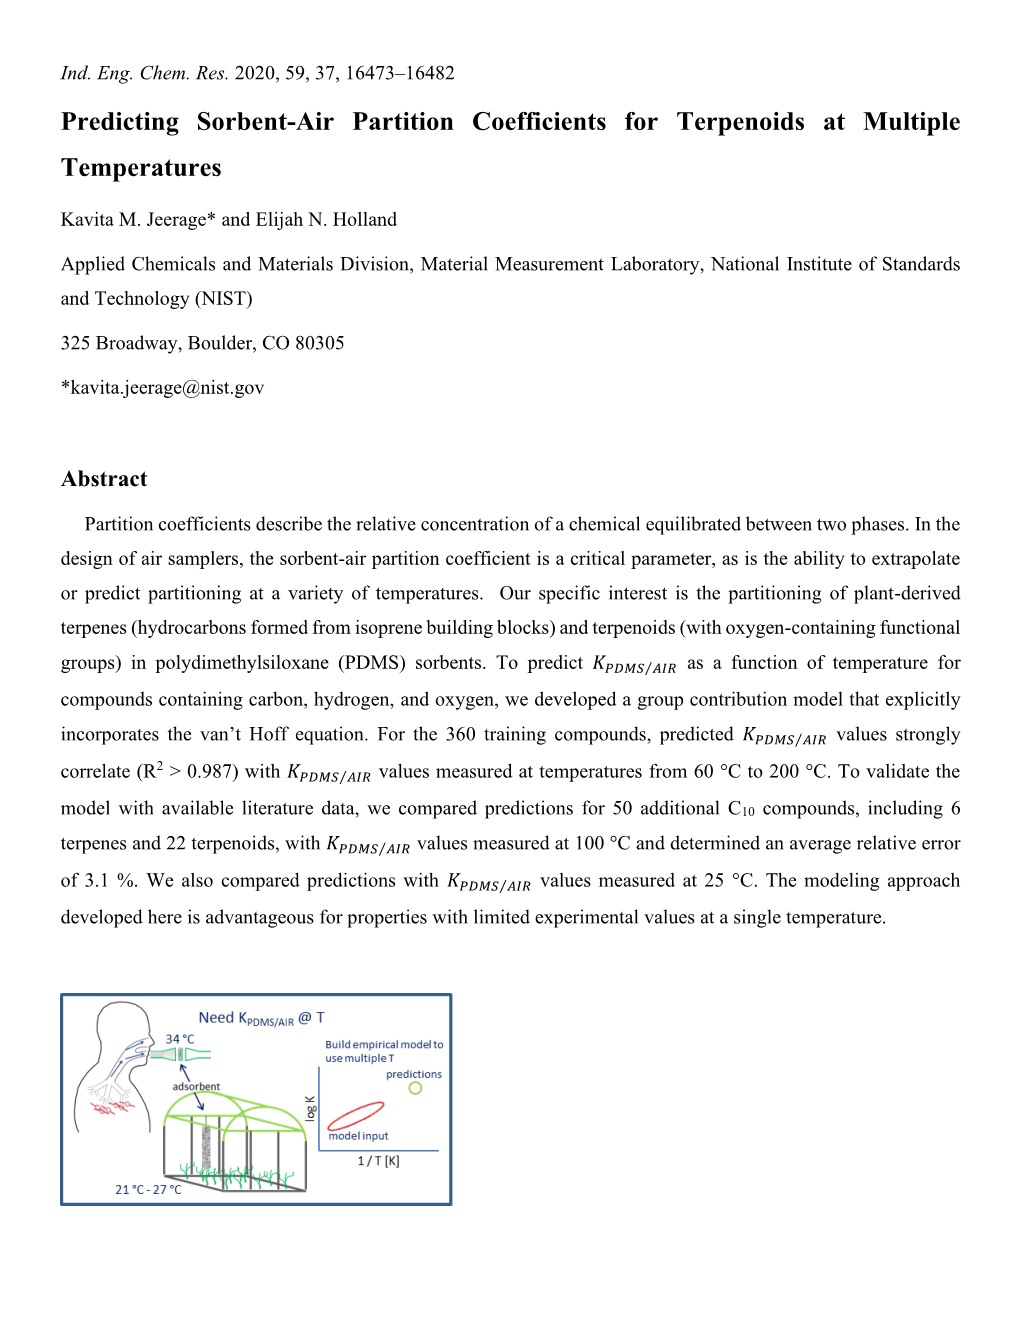 Predicting Sorbent-Air Partition Coefficients for Terpenoids at Multiple Temperatures